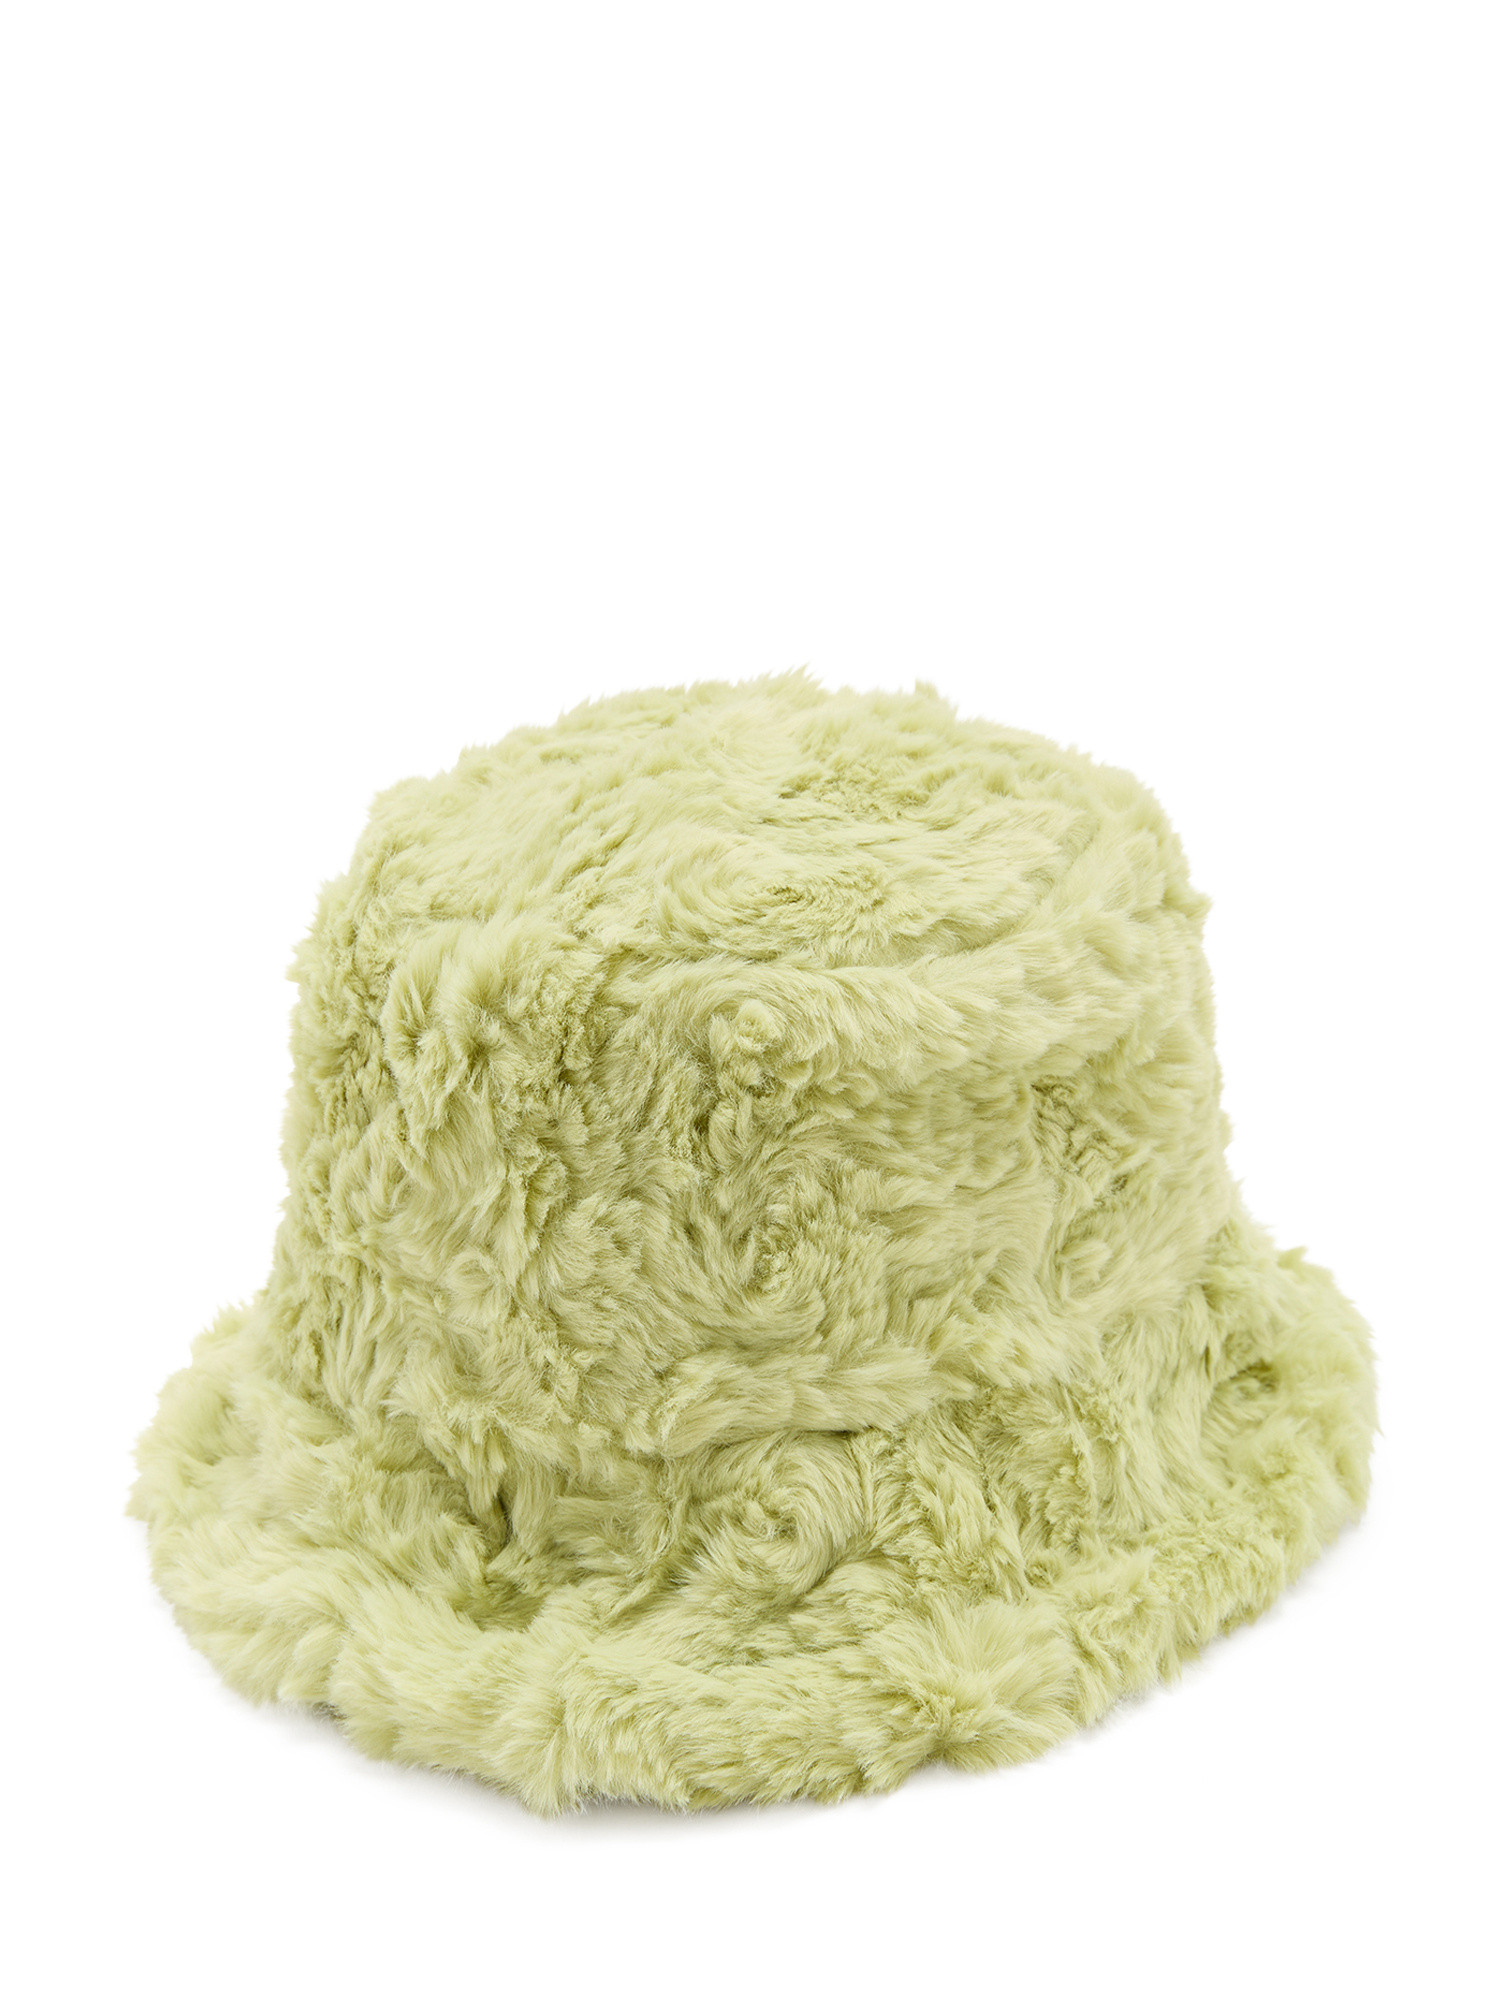 Koan - Eco fur cloche hat, Green, large image number 0